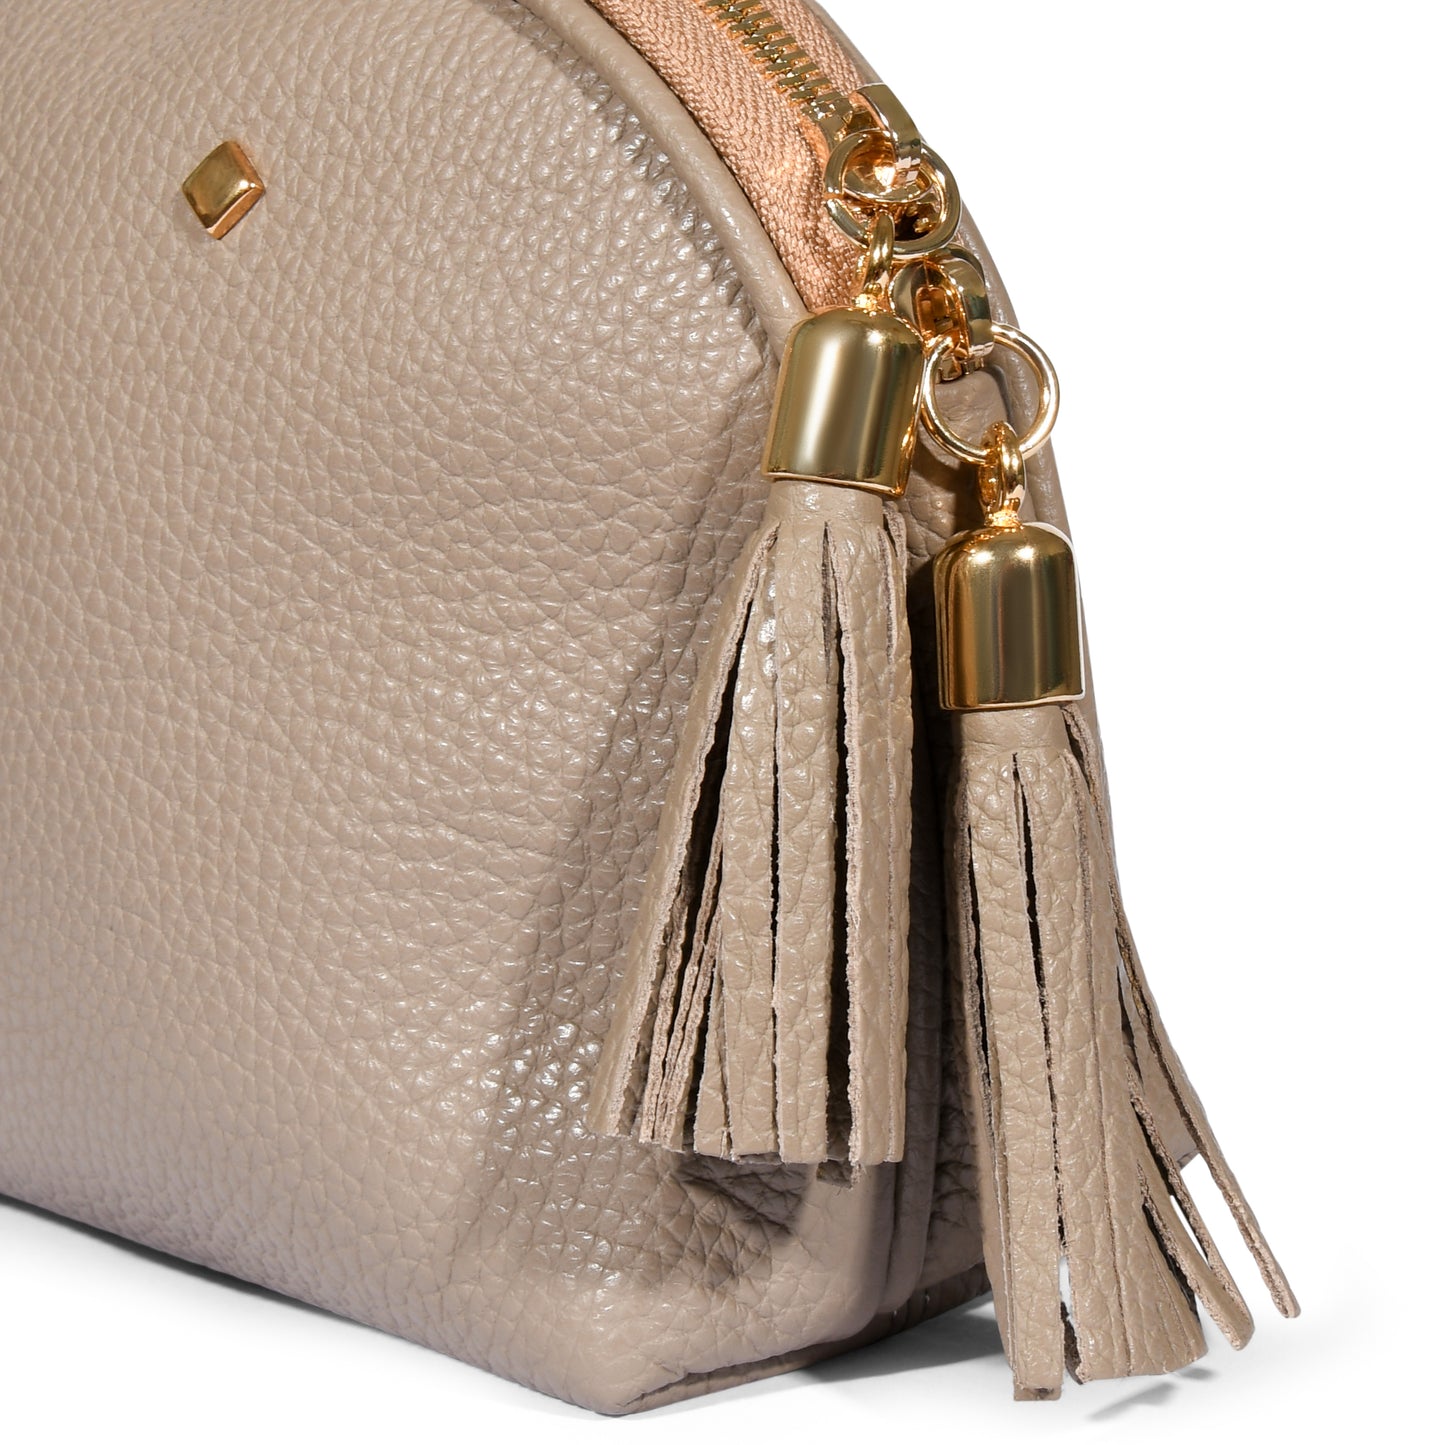 NEW HALF MOON MAKE-UP BAG - TAUPE with GOLD